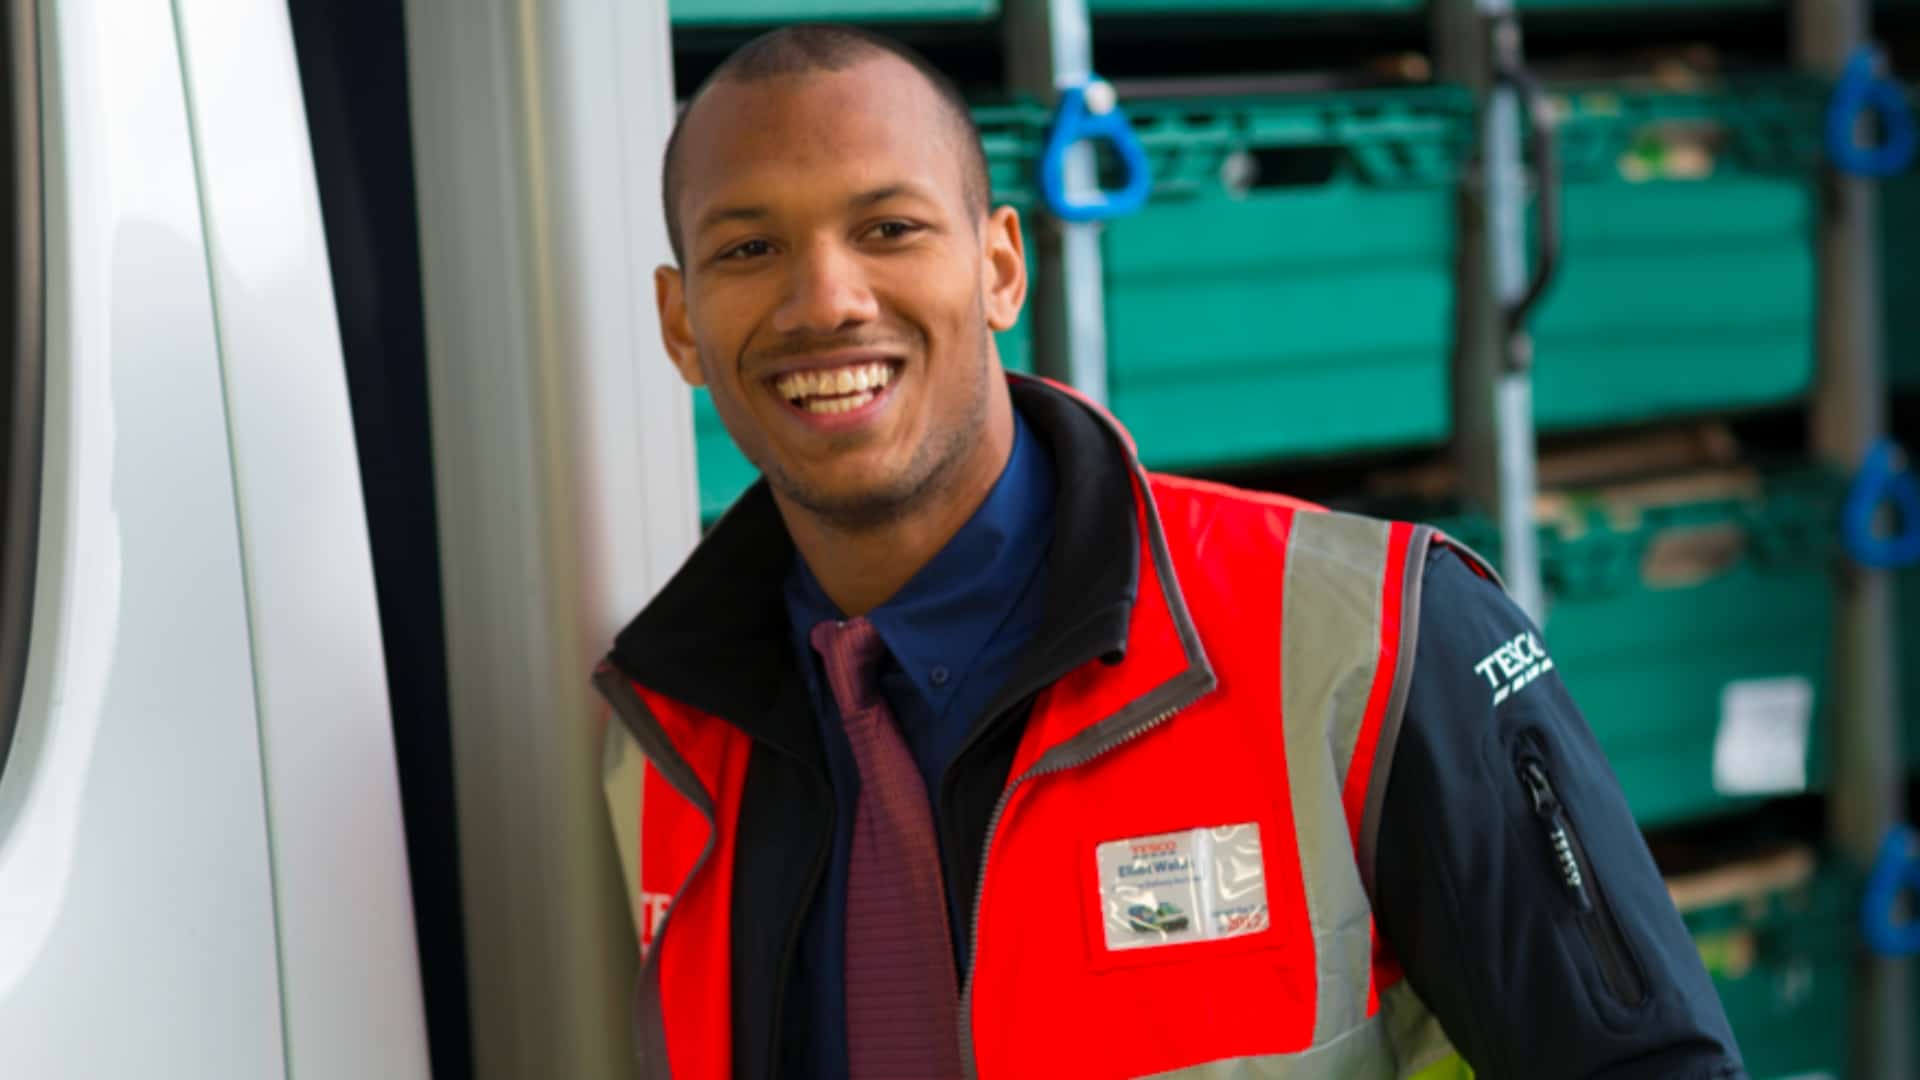 tesco worker delivery driver